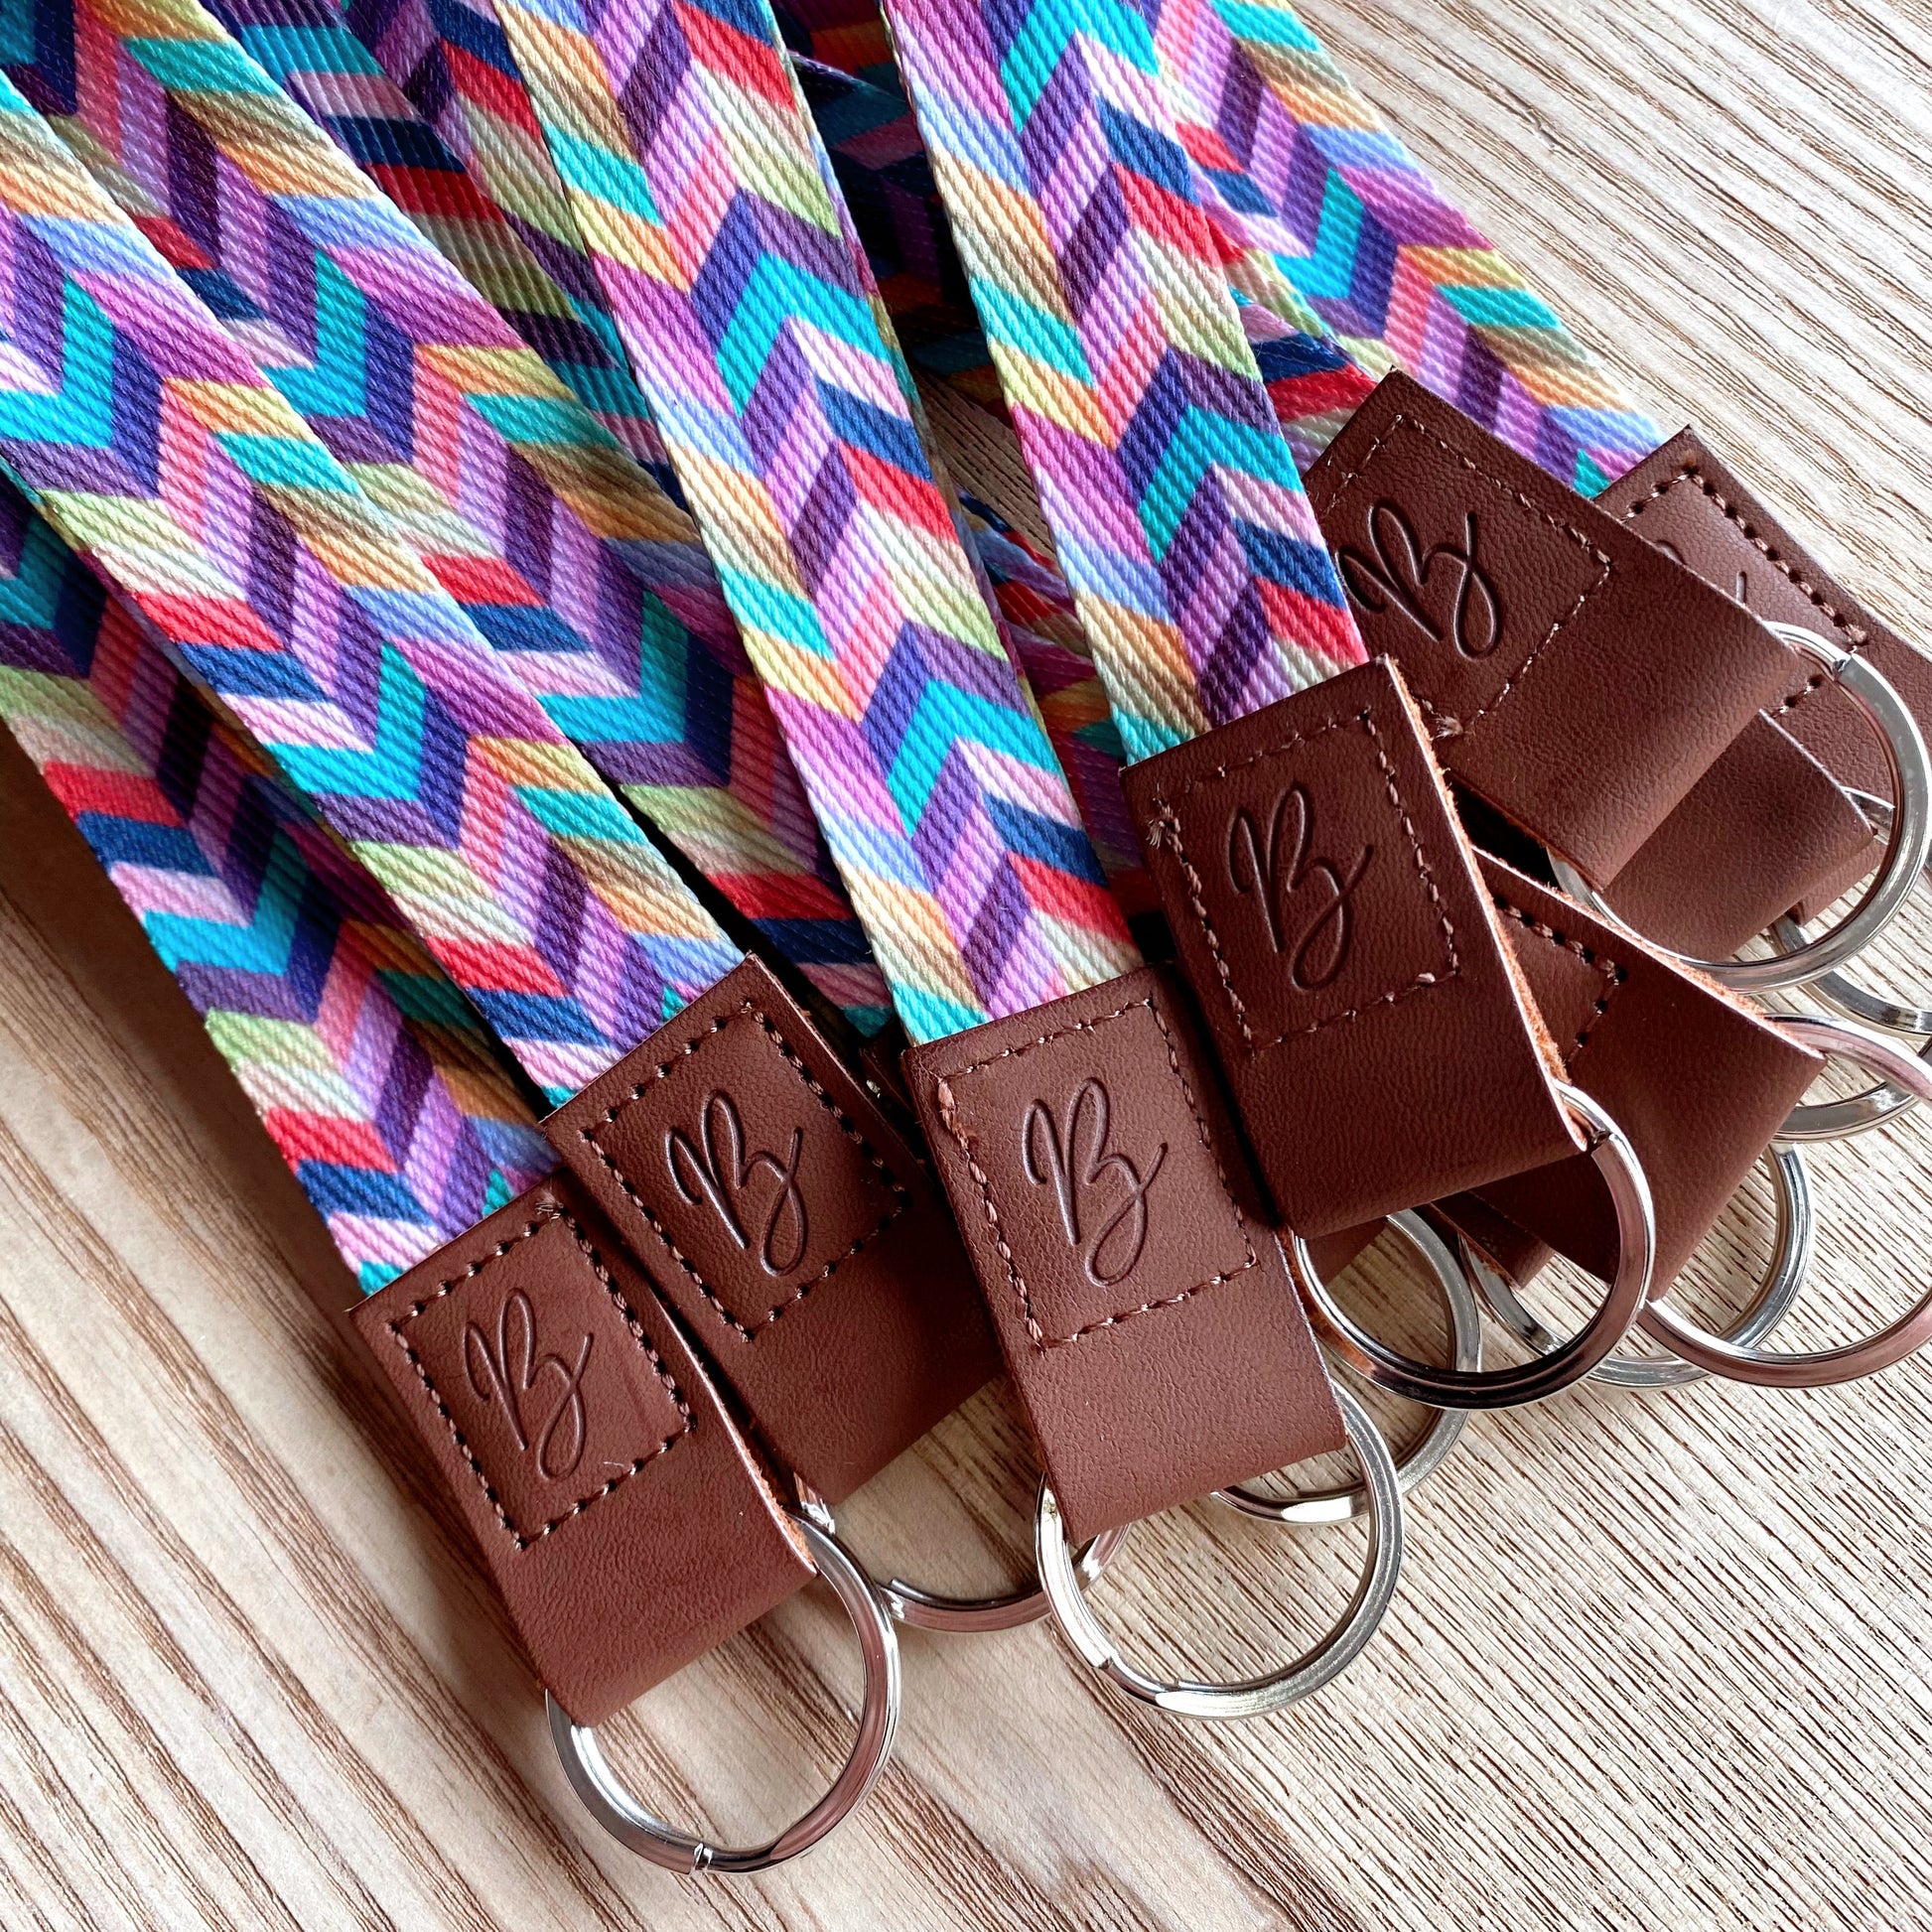 faux leather and polyester wristlet key fob keychains in rainbow print